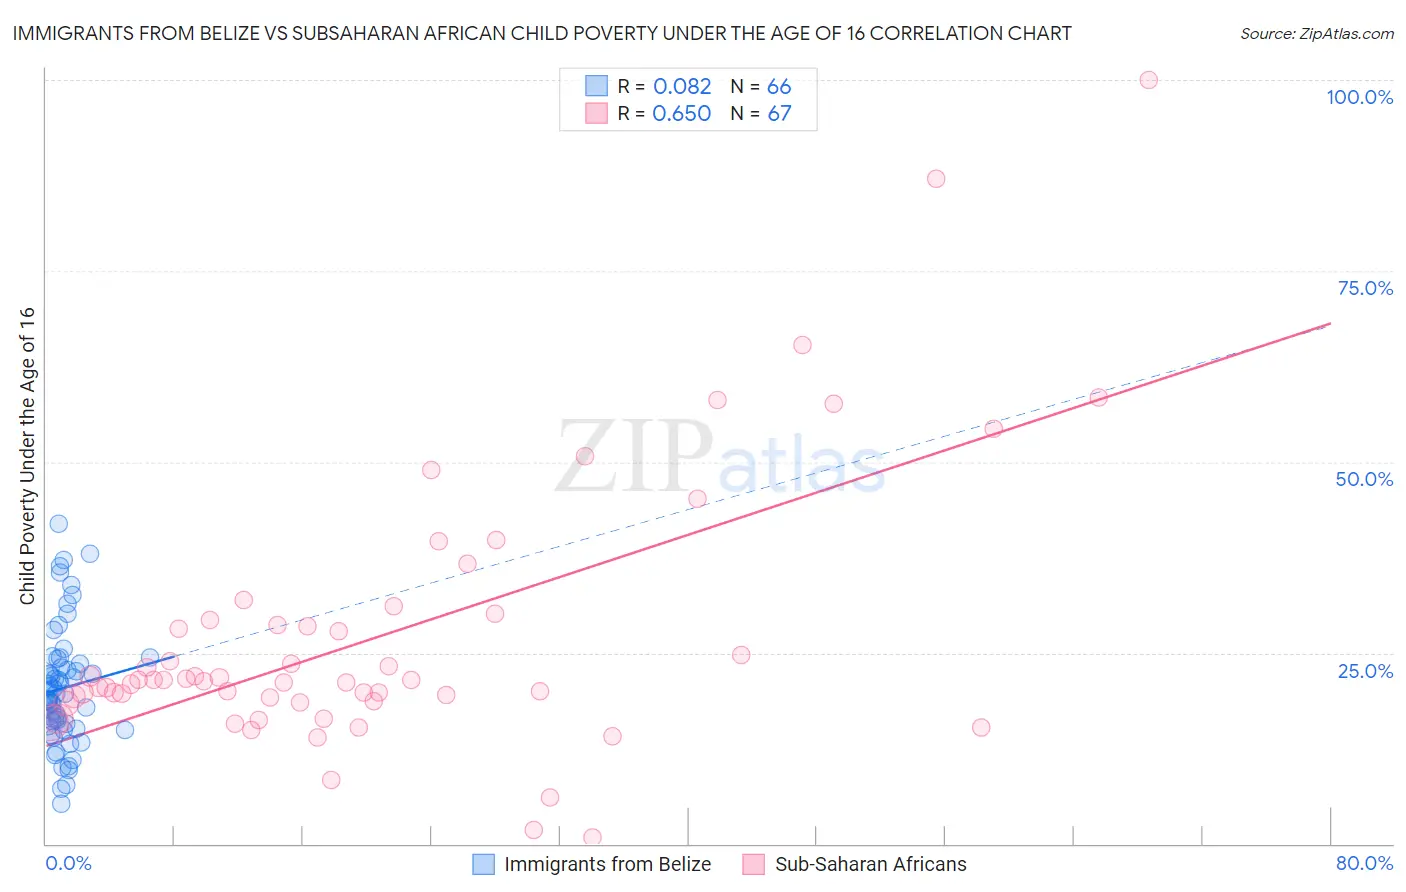 Immigrants from Belize vs Subsaharan African Child Poverty Under the Age of 16